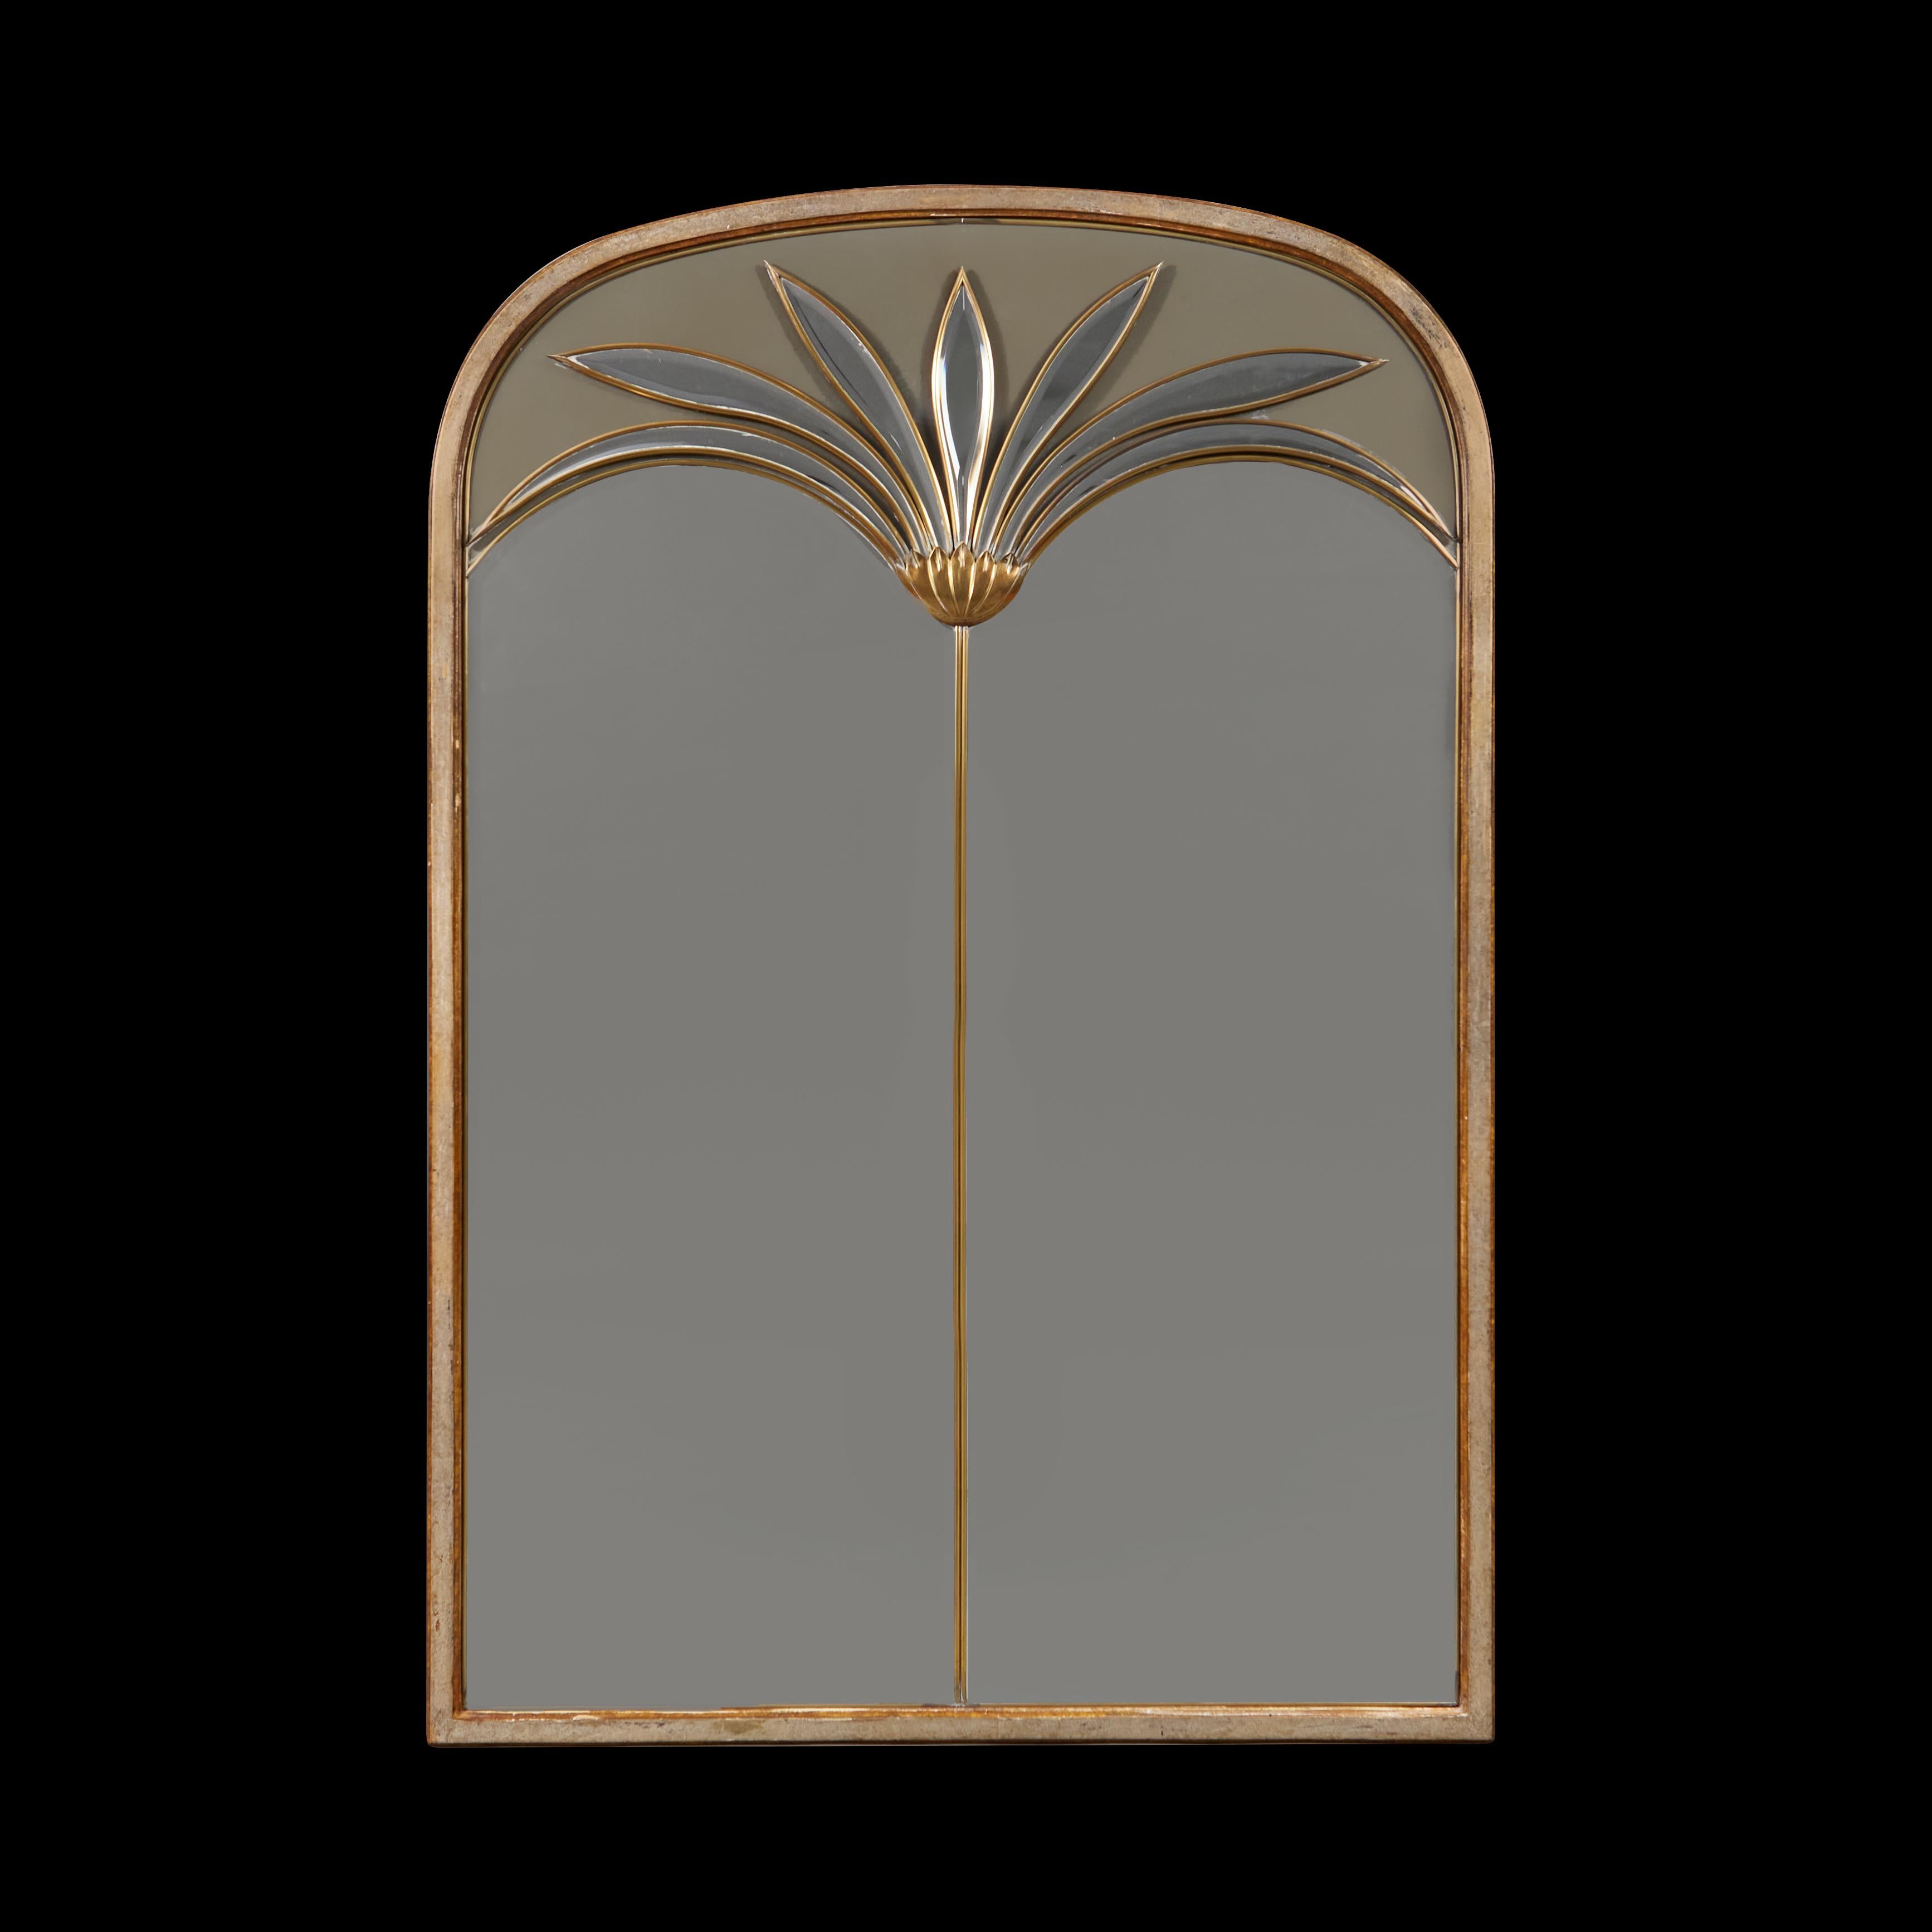 Italy, circa 1970

An unusual mirror of large scale with applied brass palm fronds, on a split bevel plate, with arched pediment, all within a silver gilt fame.

Height  134.00cmm
Width    92.00cm